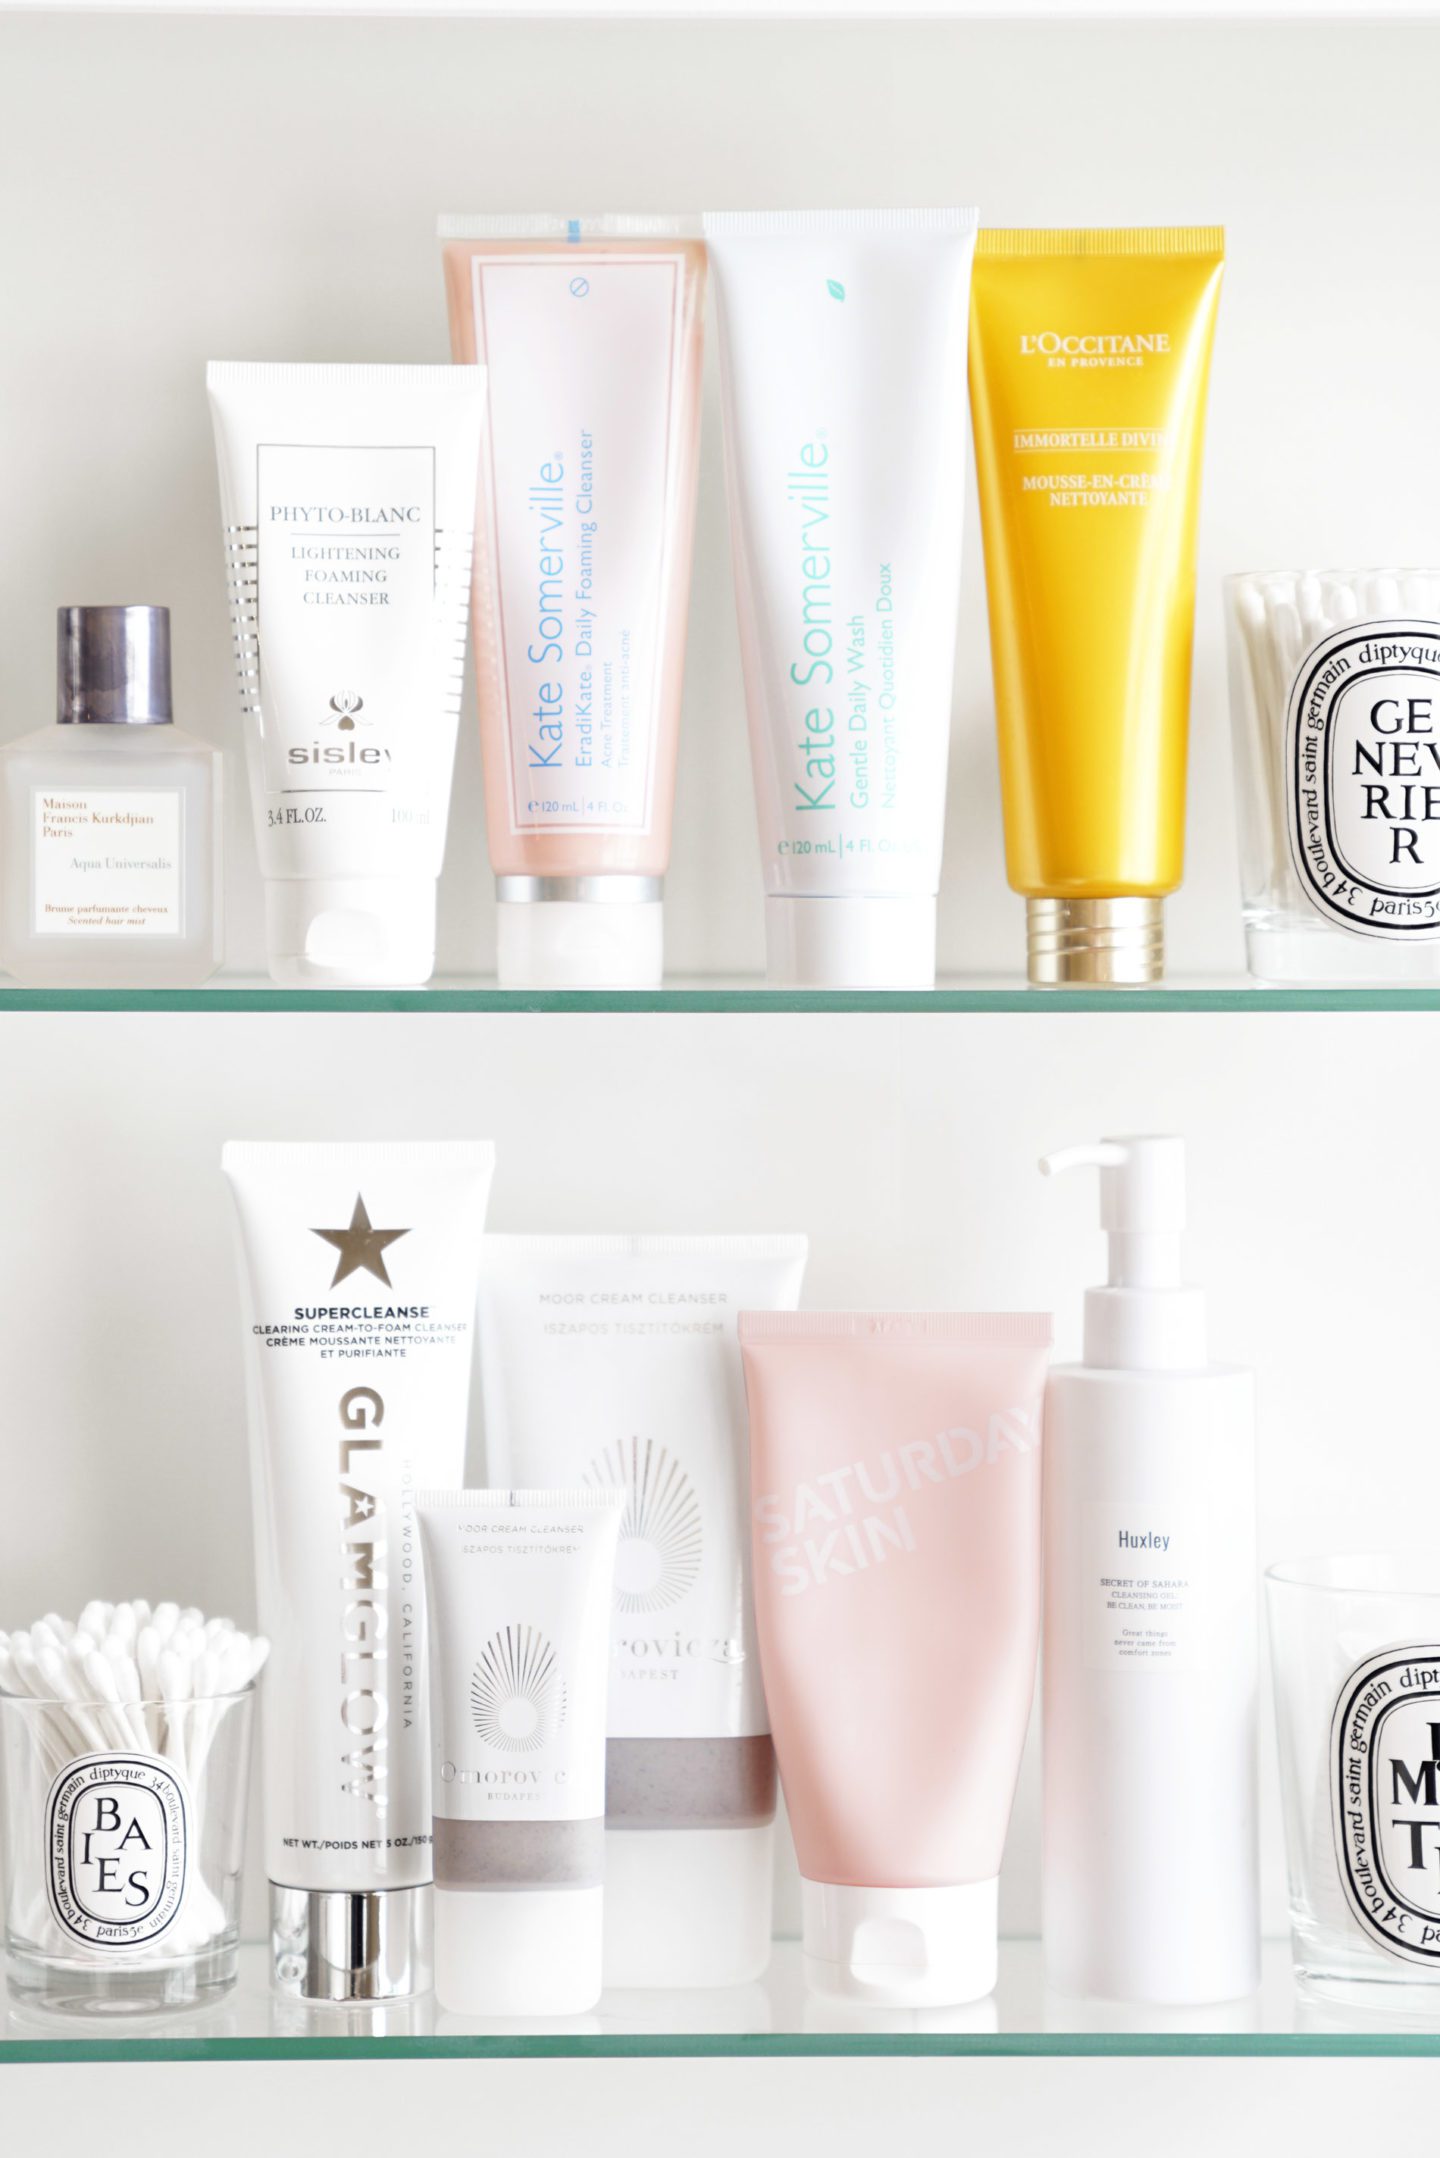 Favorite Cleansers Sisley, Kate Somerville, L'Occitane, Glamglow, Saturday Skin | The Beauty Look Book